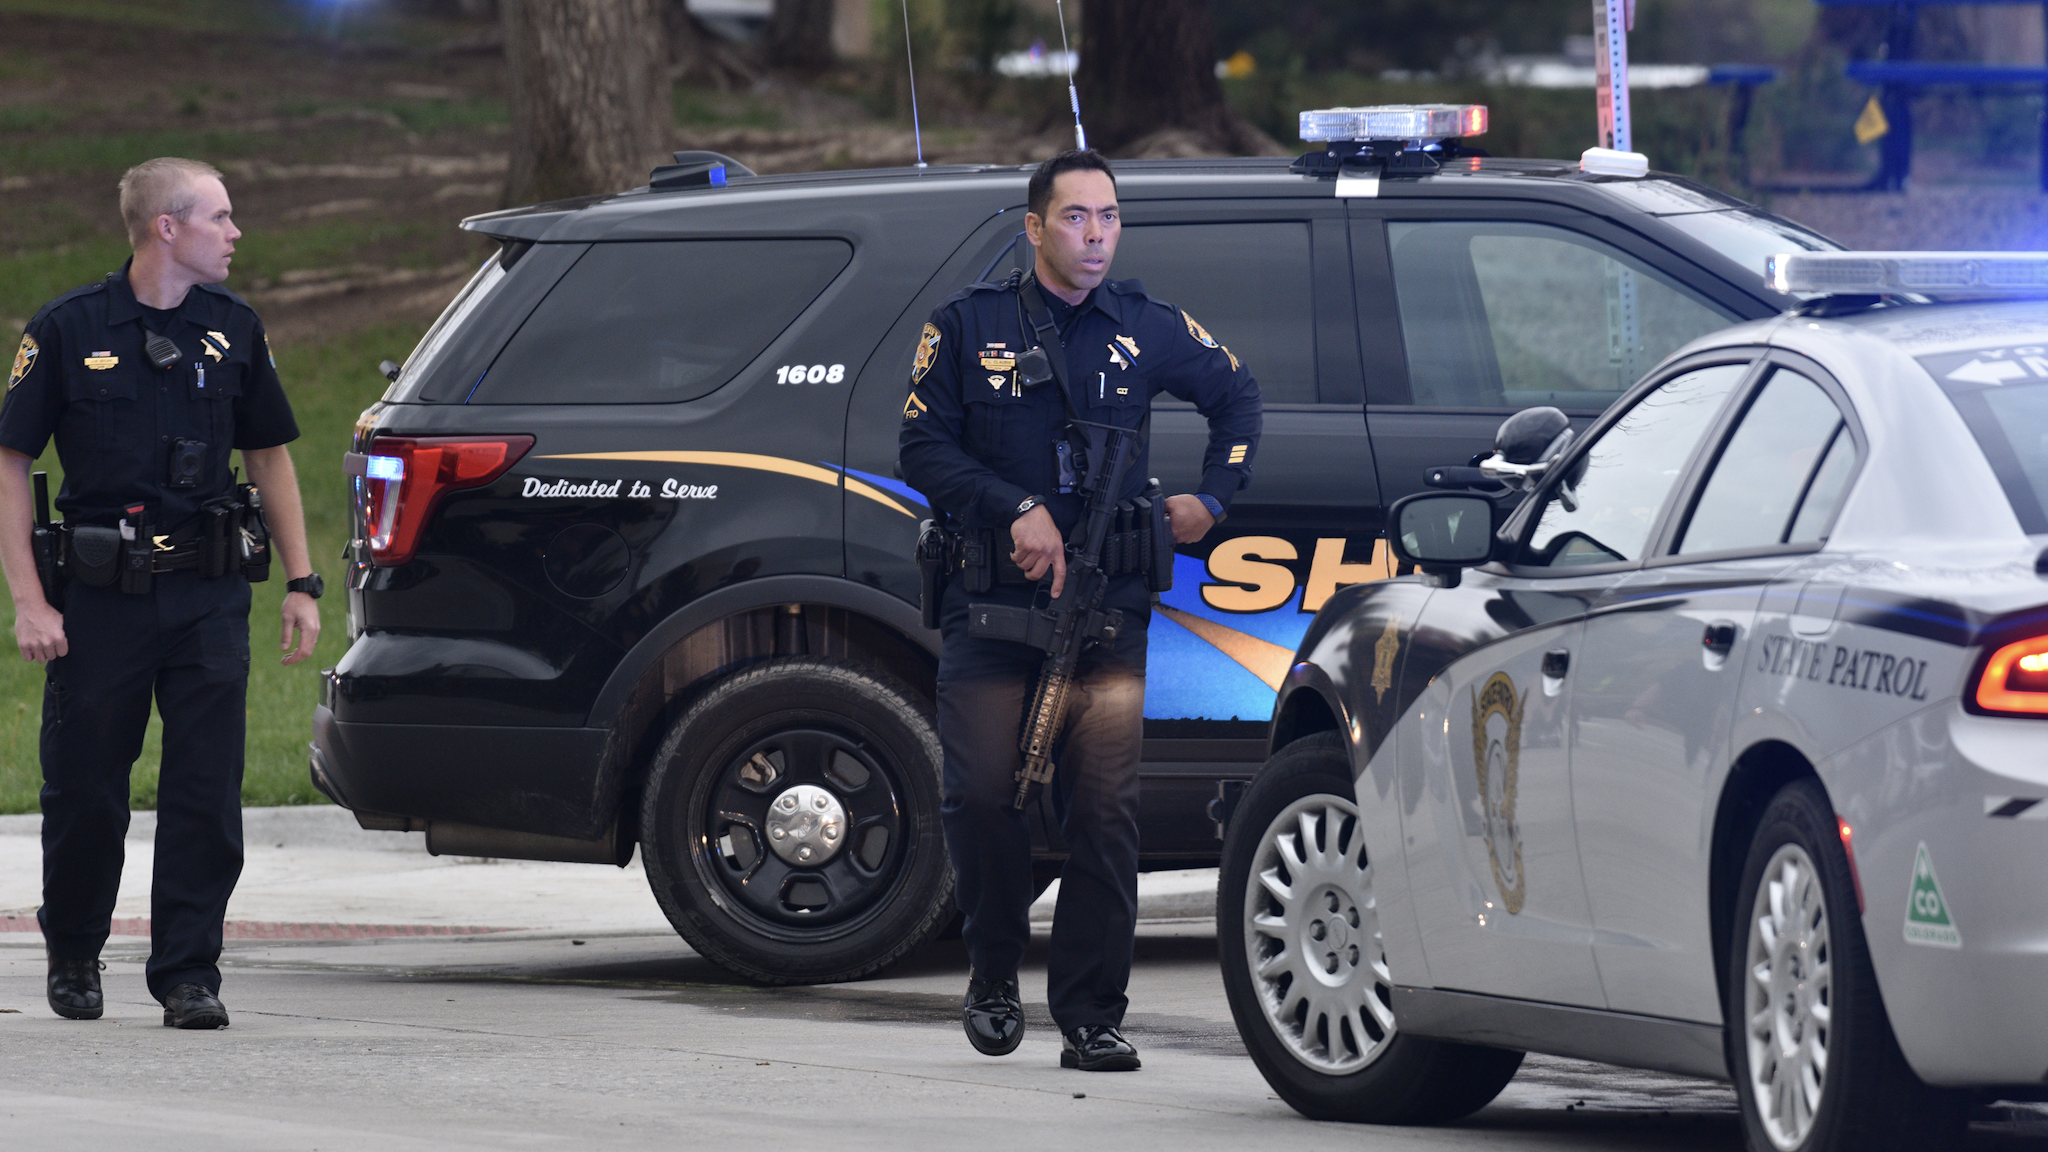 HIGHLANDS RANCH, COLORADO - MAY 07: Officers patrol the scene of a shooting in which at least seven students were injured at the STEM School Highlands Ranch on May 7, 2019 in Highlands Ranch, Colorado.